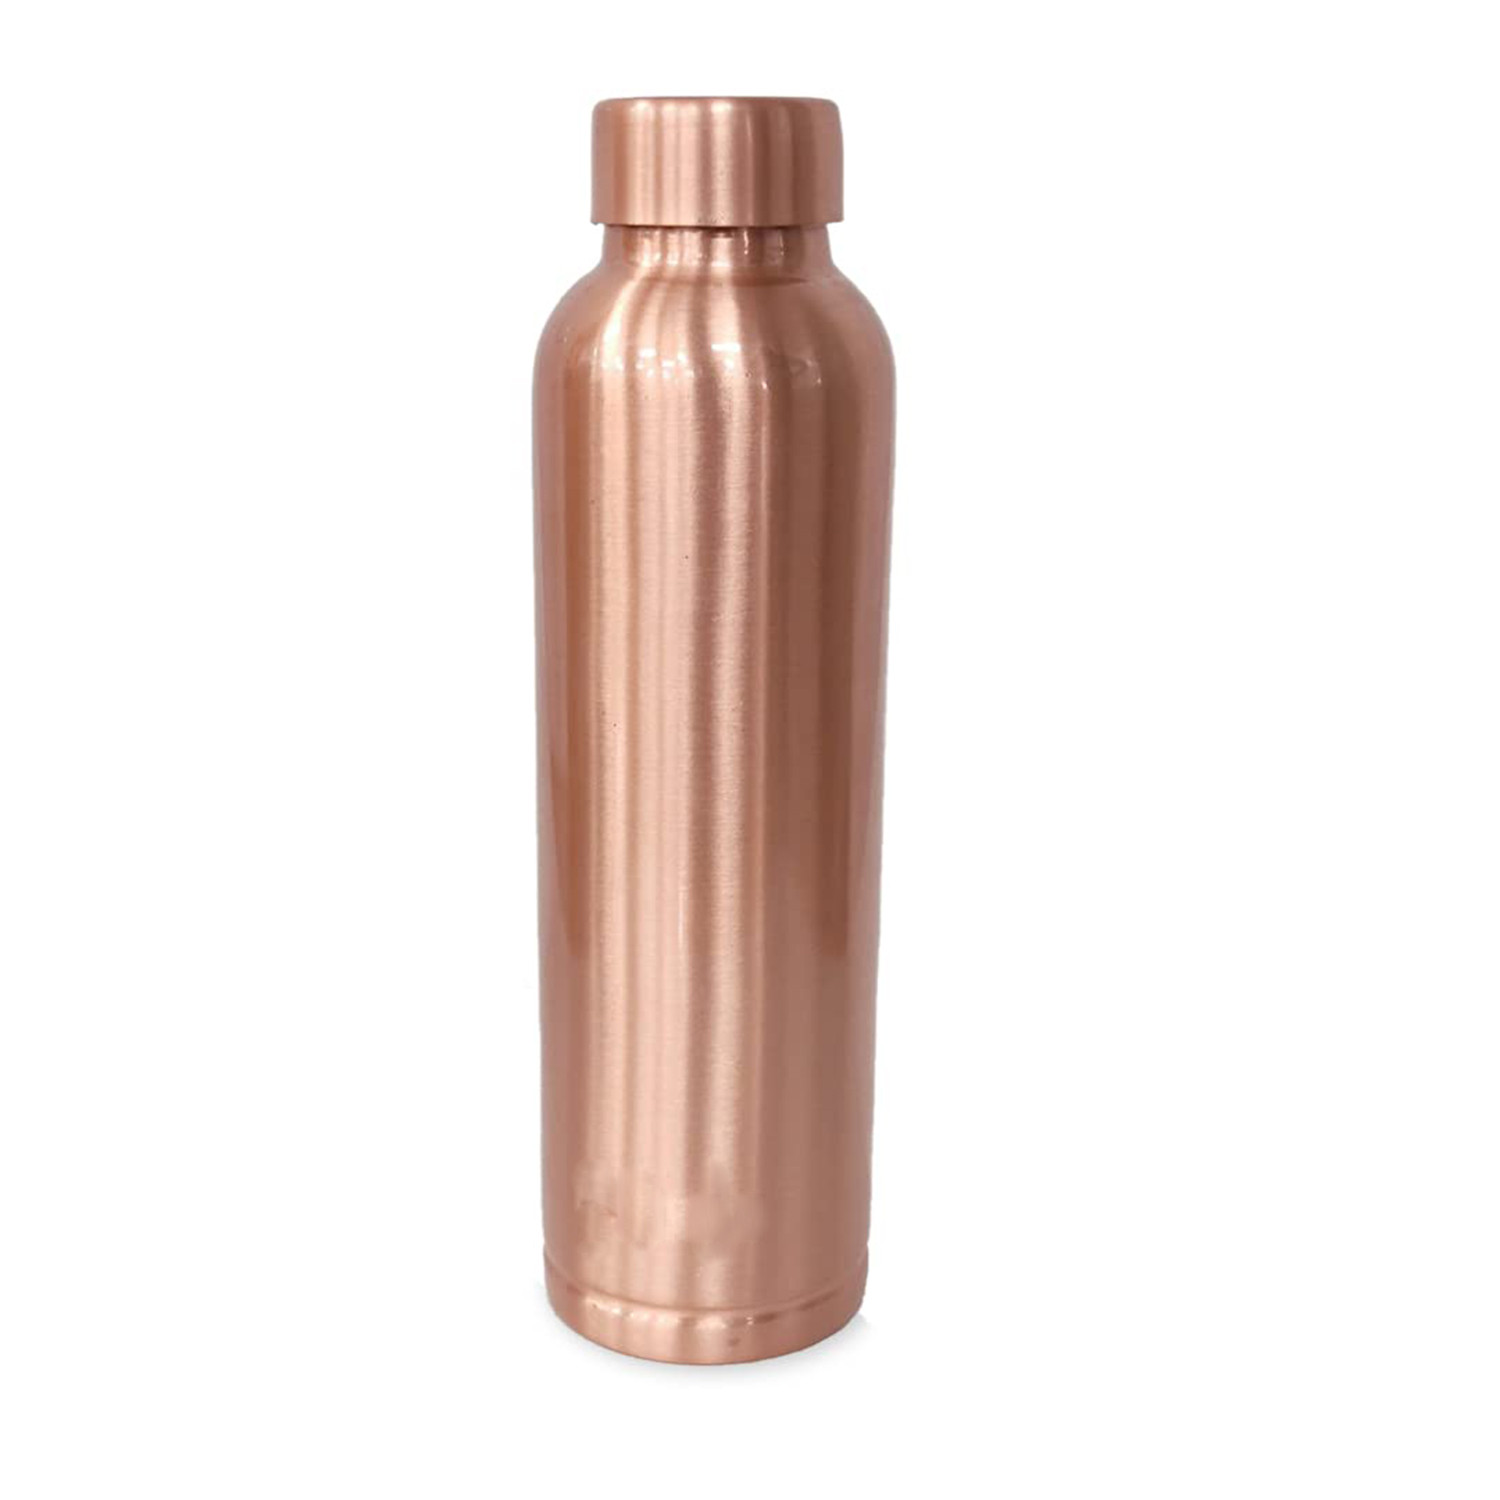 Kuber Industries Copper Water Bottle 950 ml | 100% Pure Copper Water Bottle I Leak Proof, Rust Proof I Copper Bottle For Home, School & Office (Pack of 1)